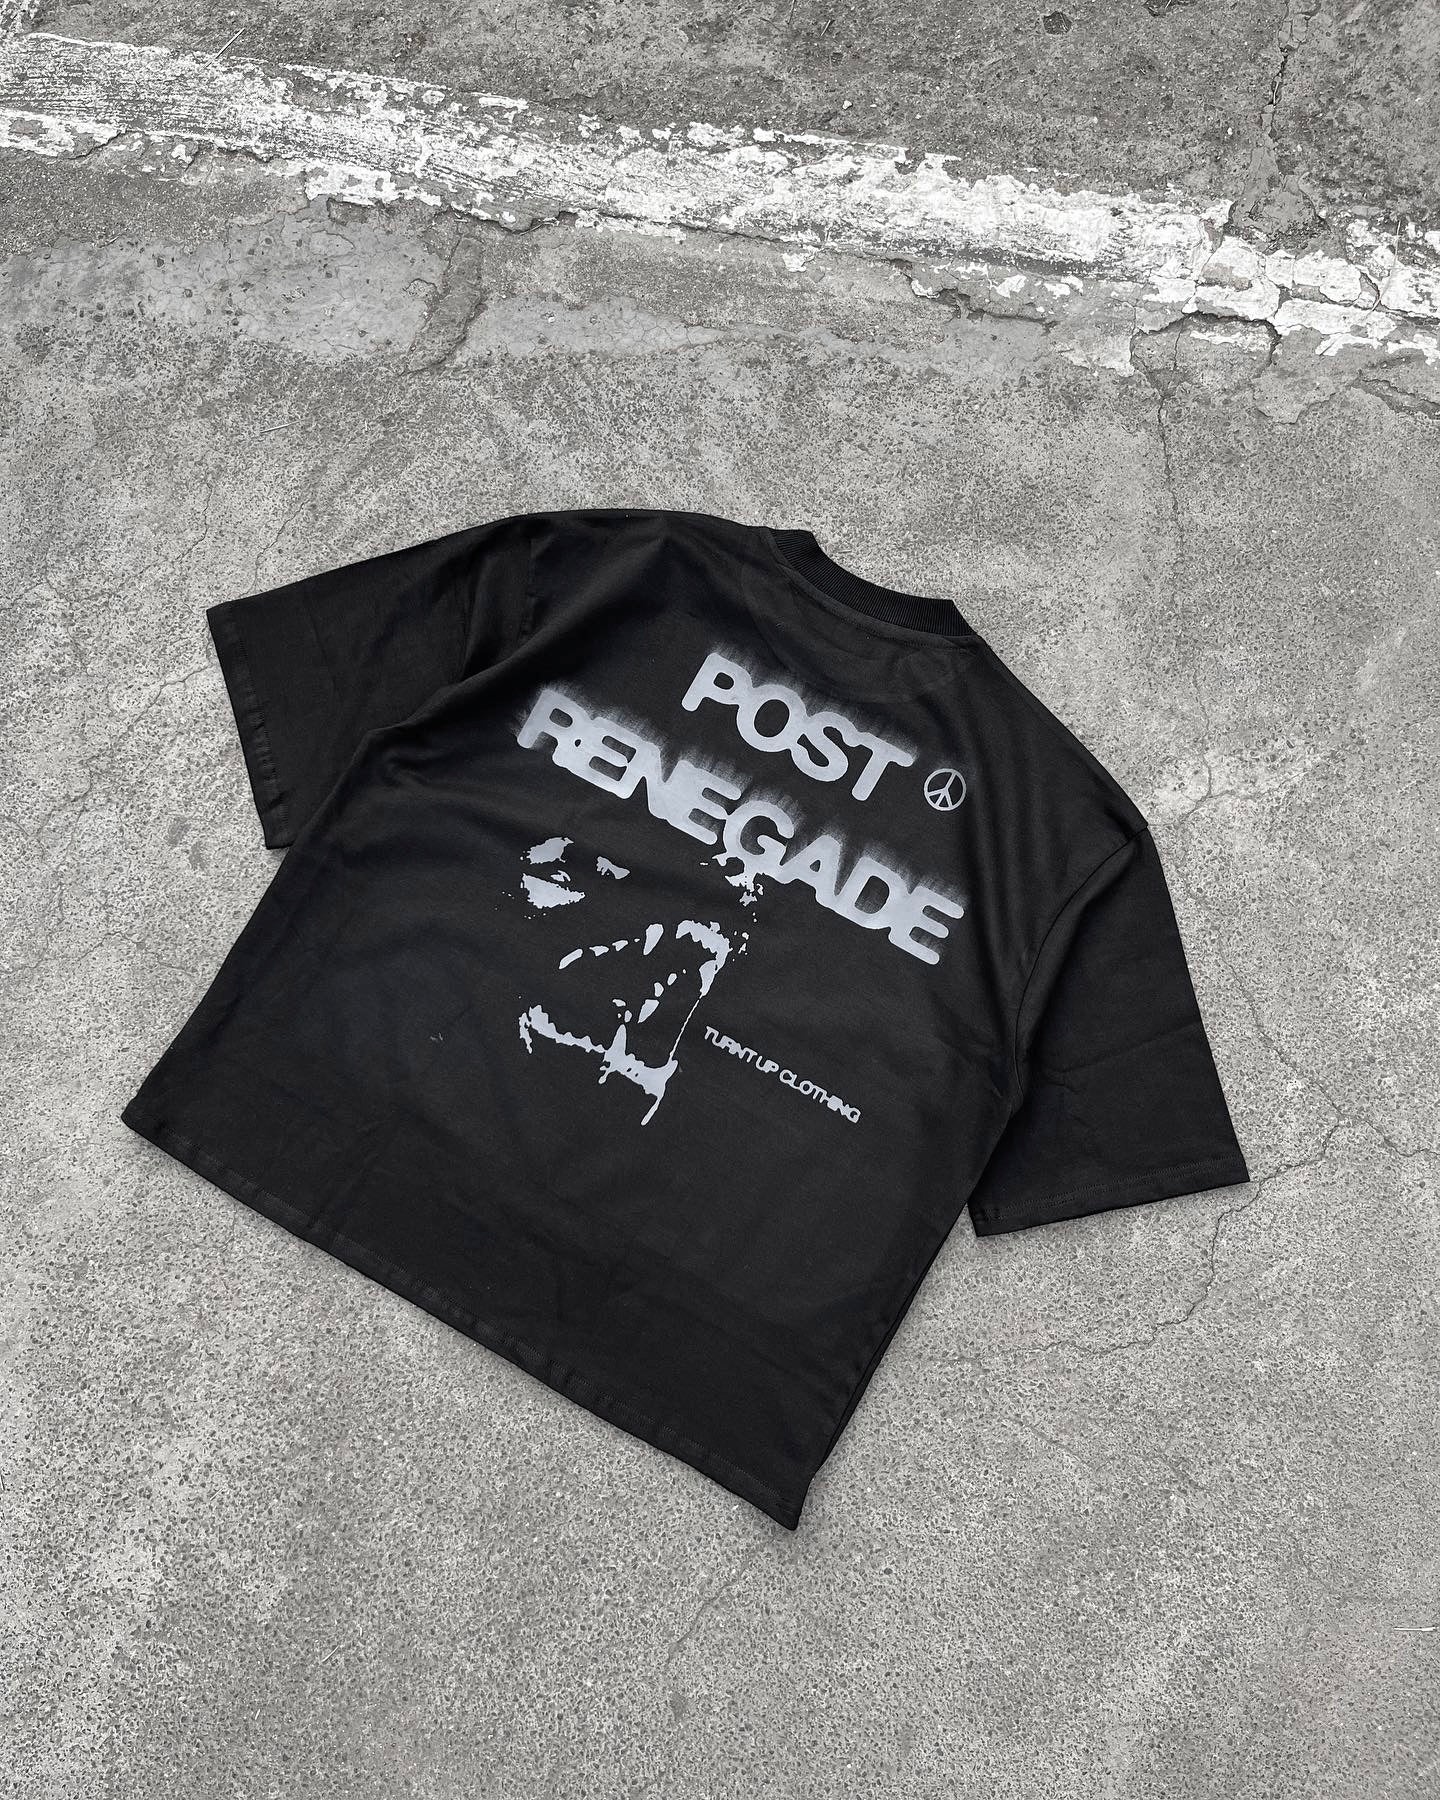 POST RENEGADE OVERSIZED T-SHIRT - TURNT UP CLOTHING